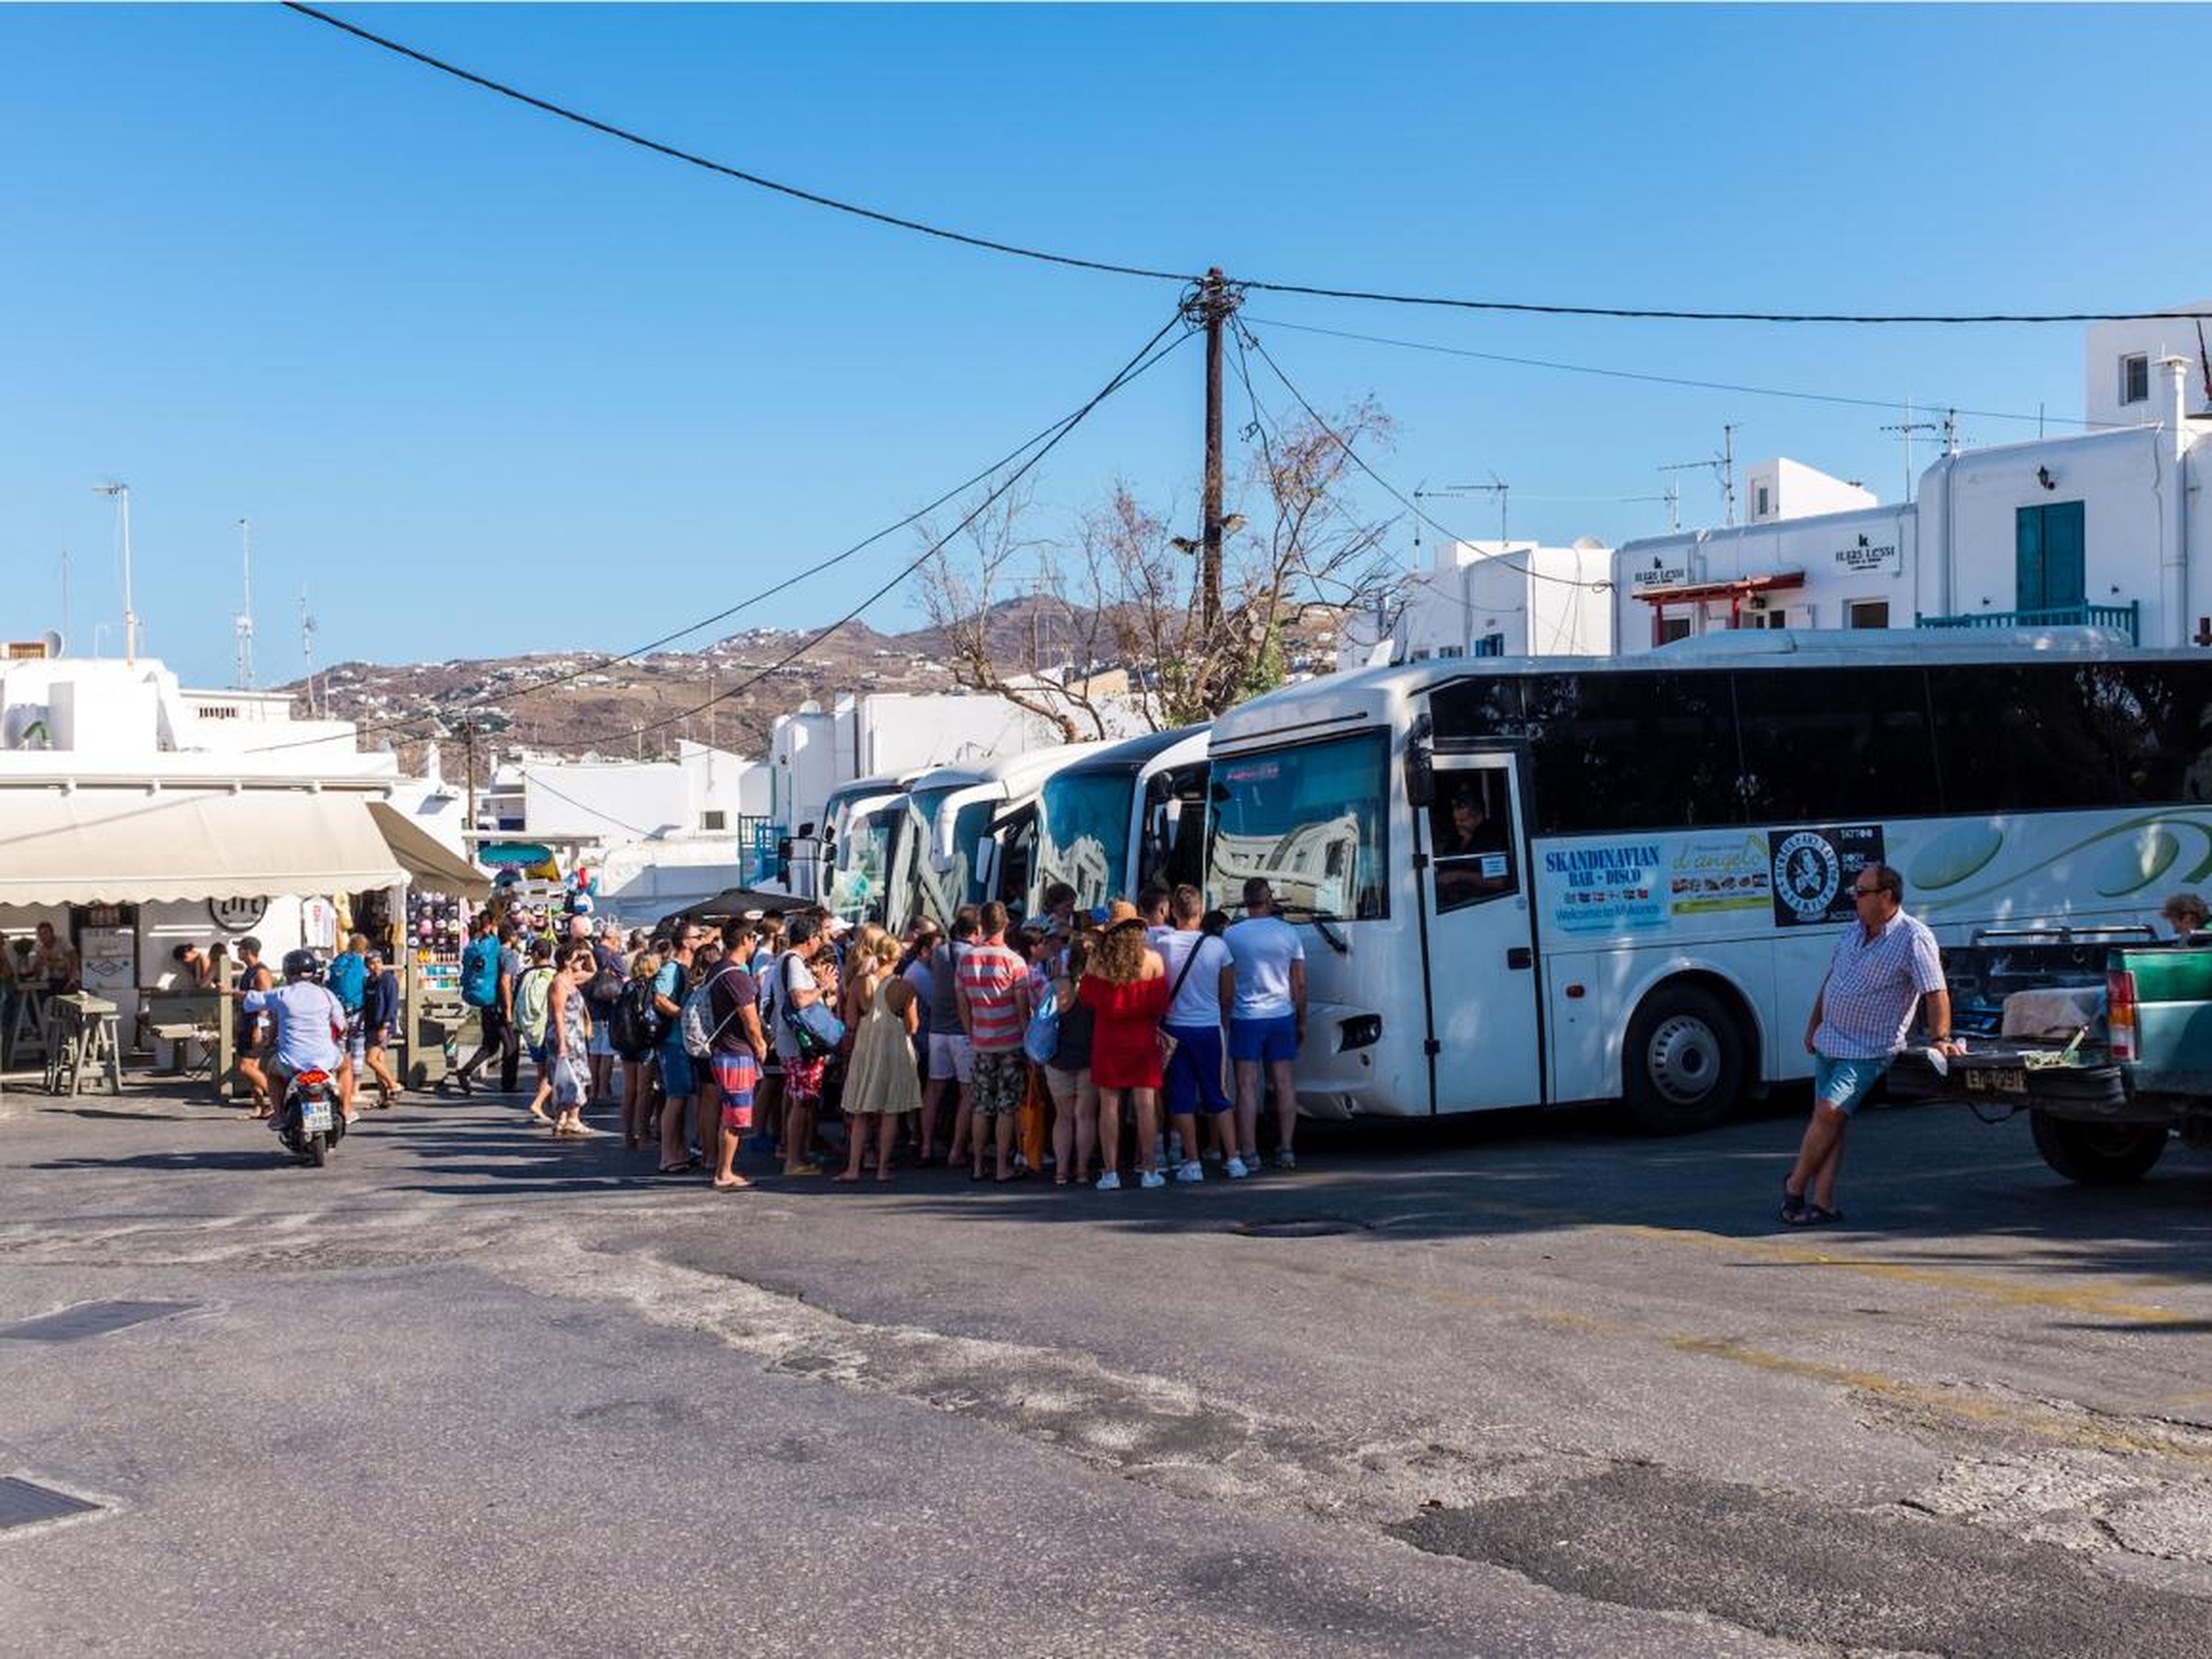 As far as getting around Mykonos, your best bet is the public bus system, which is convenient, cheap, and just about your only option. Taxis are impossible on the island. You can rent a car or a bike, but be aware, the island is